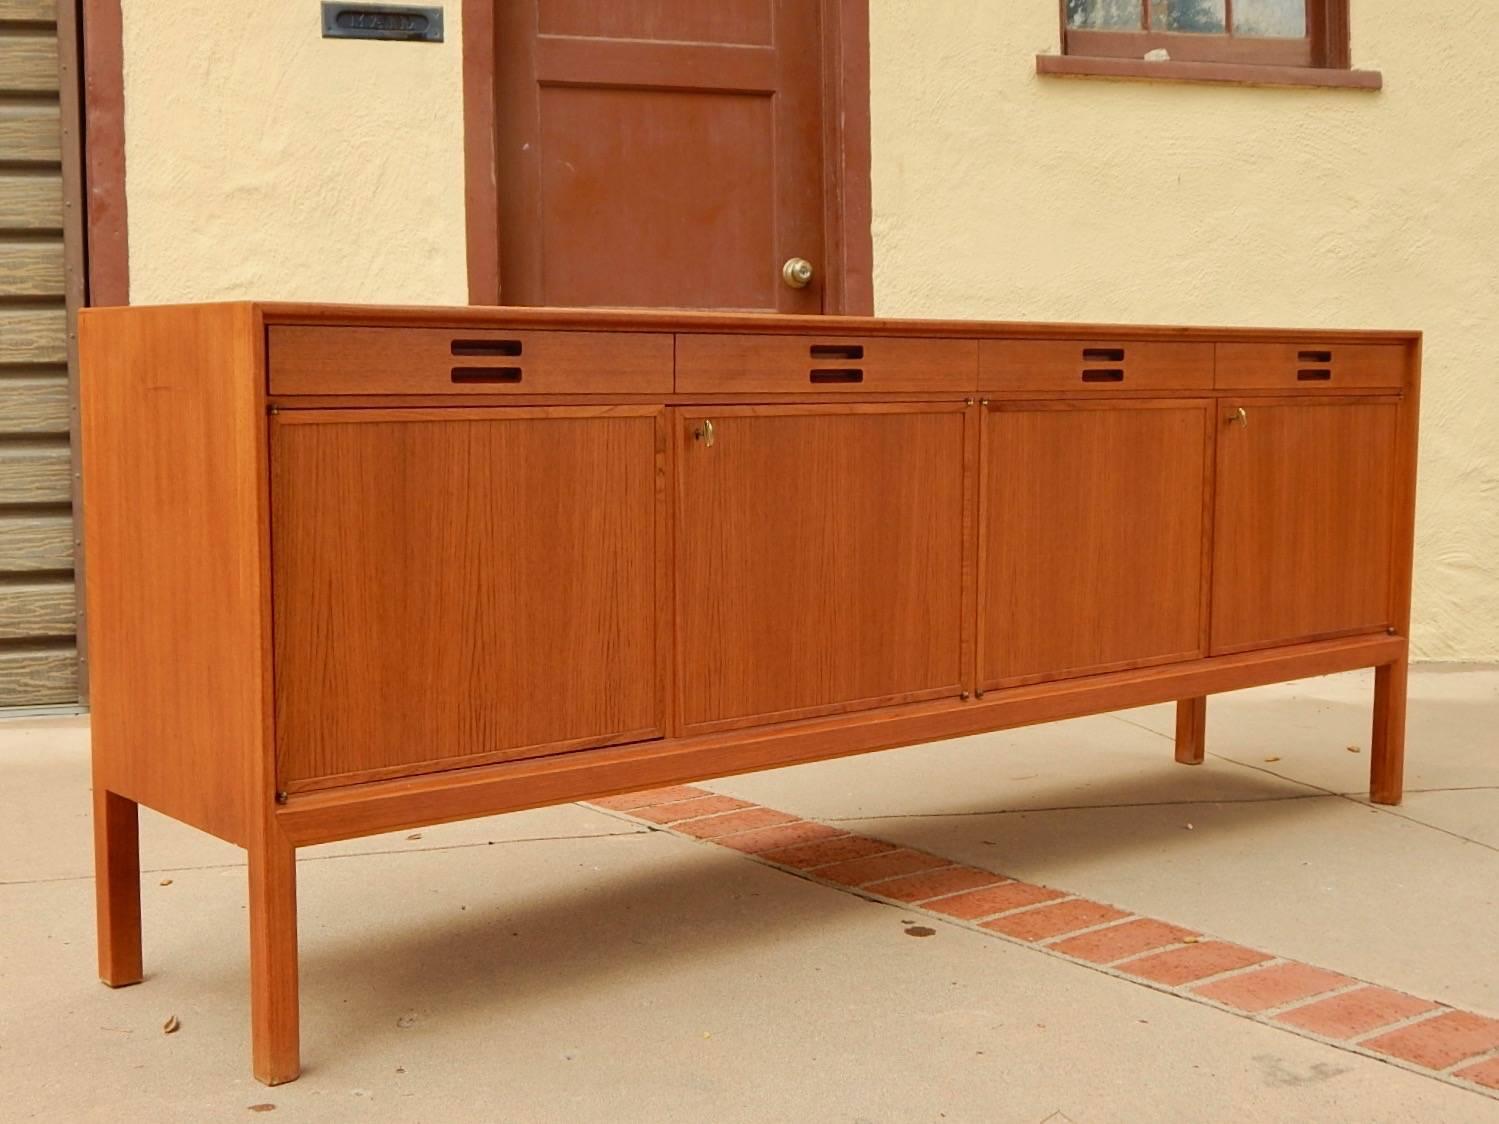 Teak sideboard designed by Axel Larsson for Bodafors, Sweden, circa 1960. In excellent original condition with all original keys and shelves.